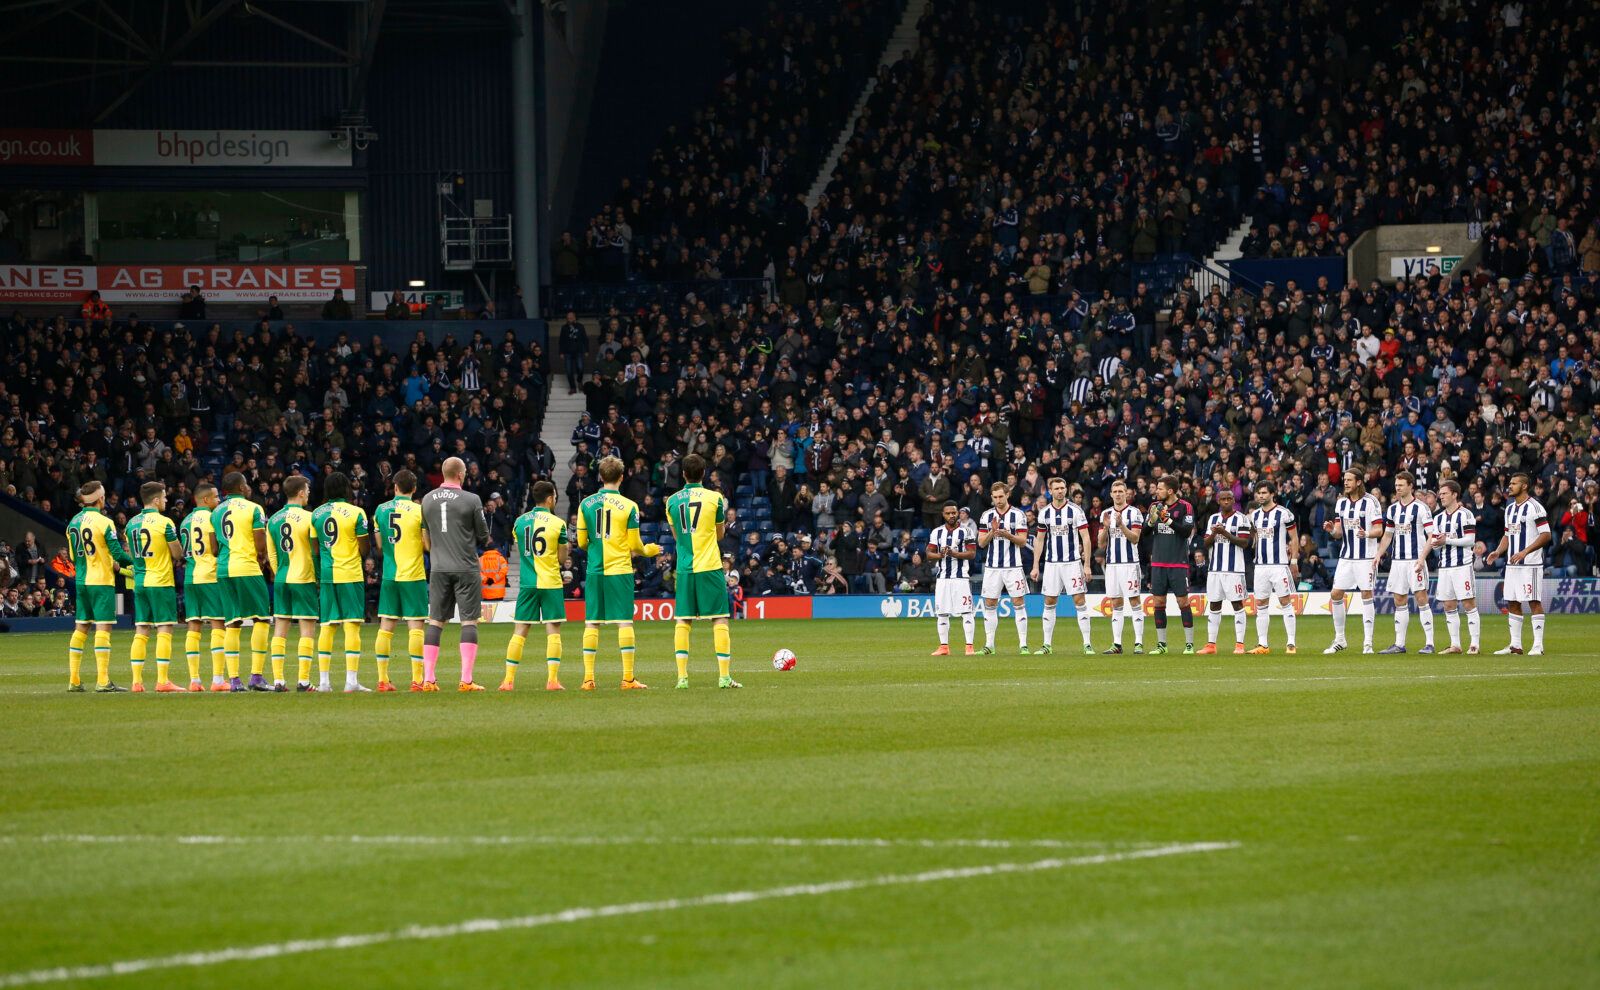 Football Soccer - West Bromwich Albion v Norwich City - Barclays Premier League - The Hawthorns - 19/3/16 
General view during a minutes silence in memory of former West Brom player Dave Walsh before the match 
Mandatory Credit: Action Images / Craig Brough 
Livepic 
EDITORIAL USE ONLY. No use with unauthorized audio, video, data, fixture lists, club/league logos or 